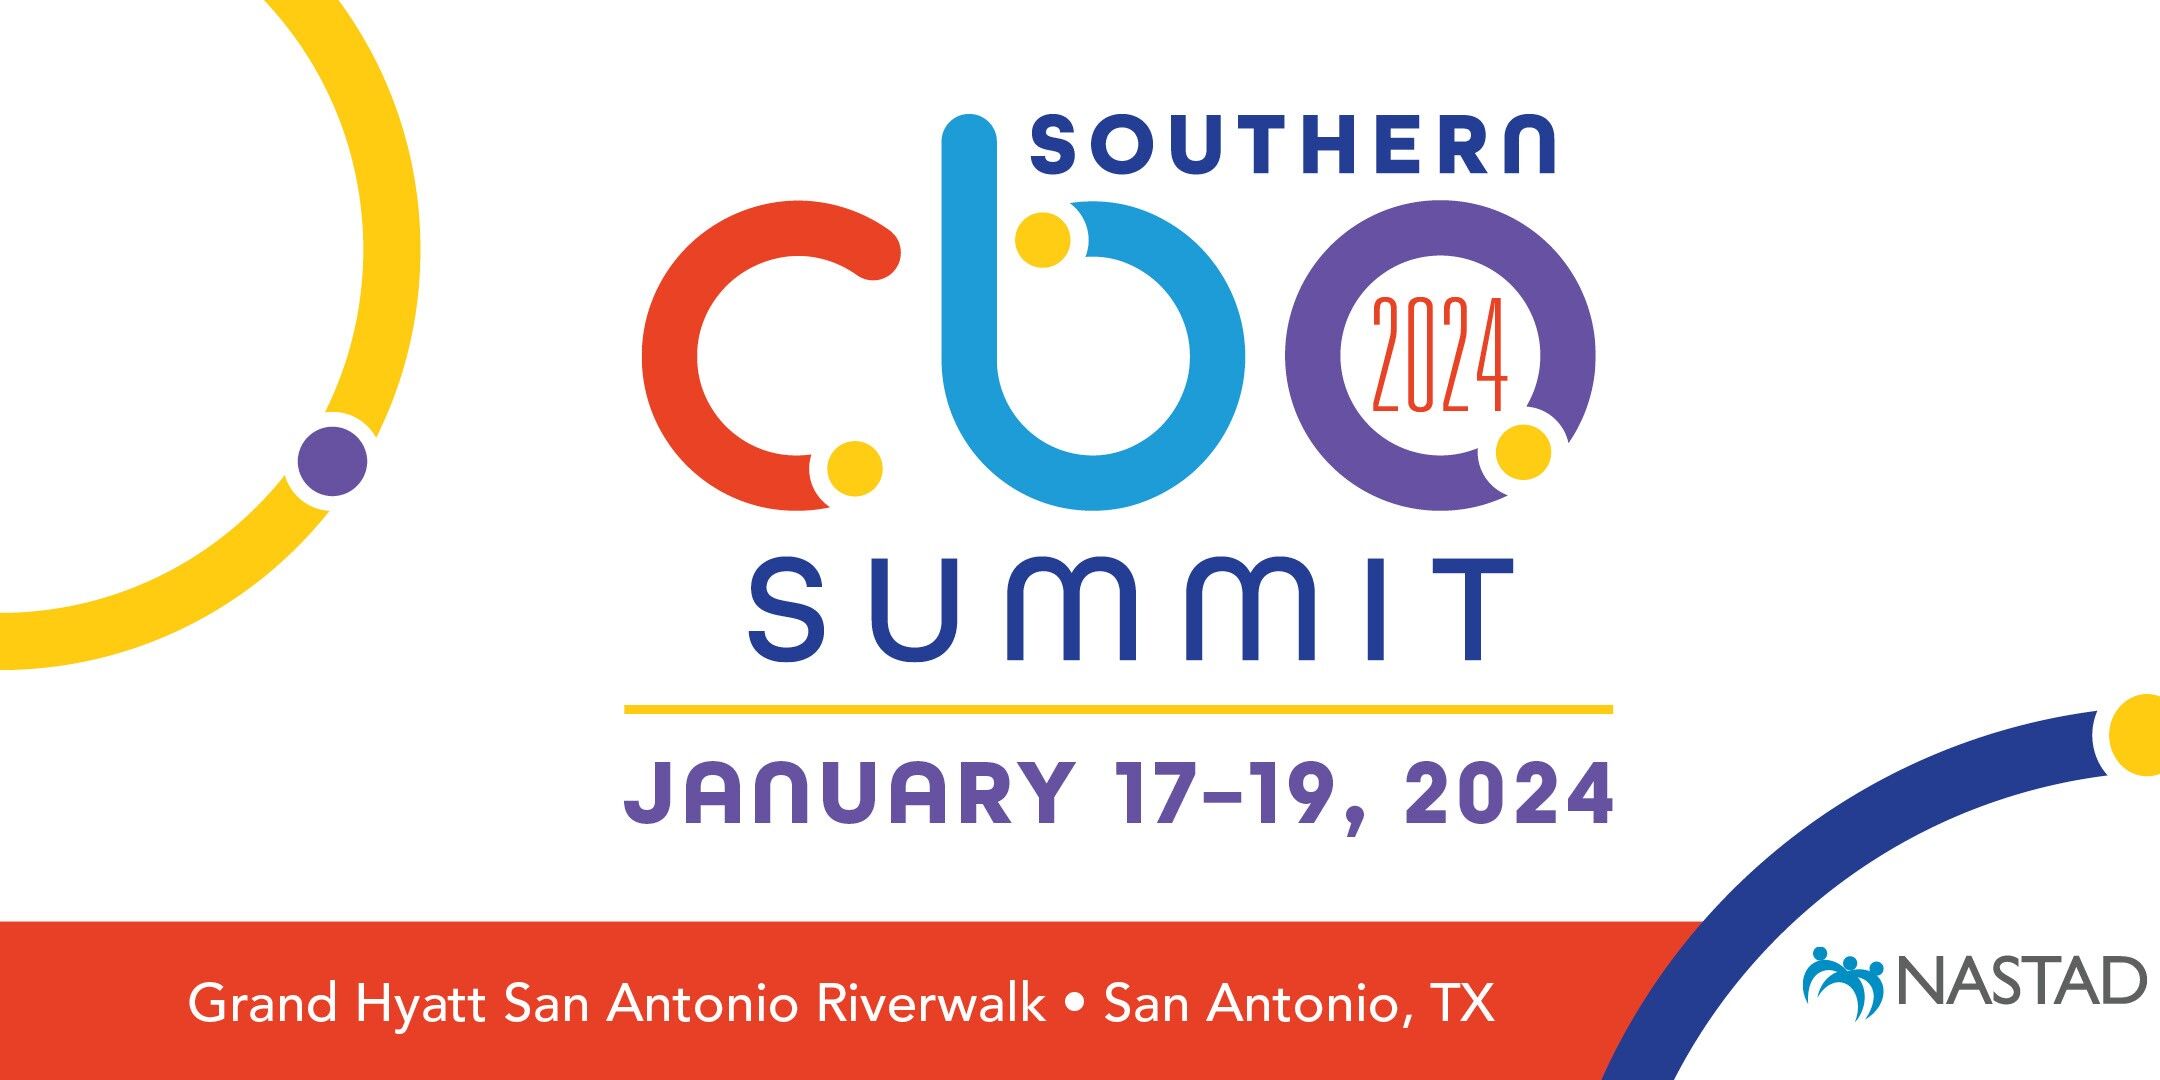 2024 Southern CBO Summit Save-the-Date